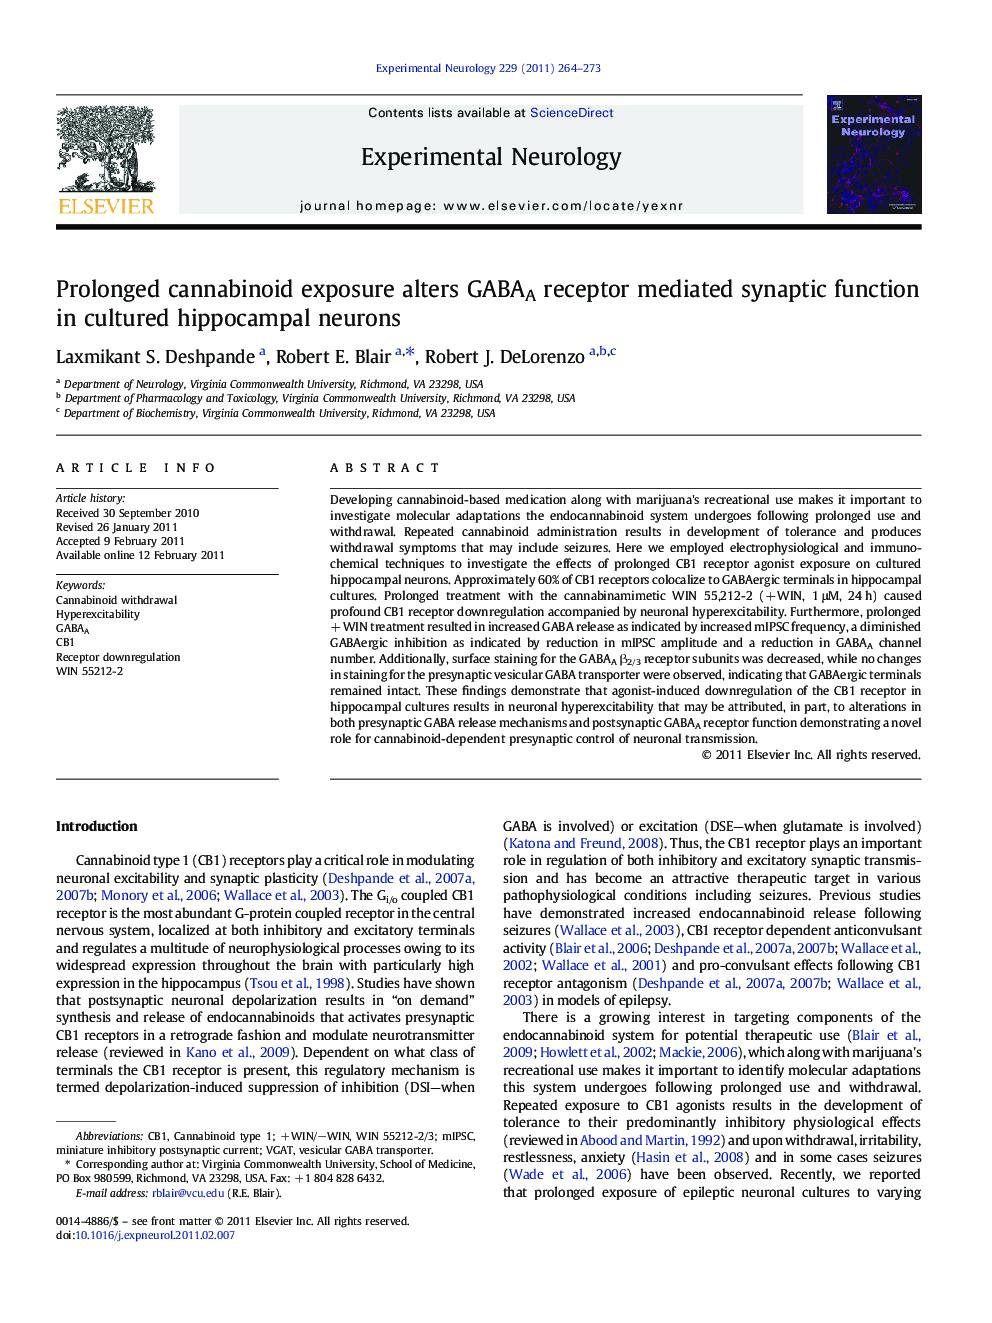 Prolonged cannabinoid exposure alters GABAA receptor mediated synaptic function in cultured hippocampal neurons